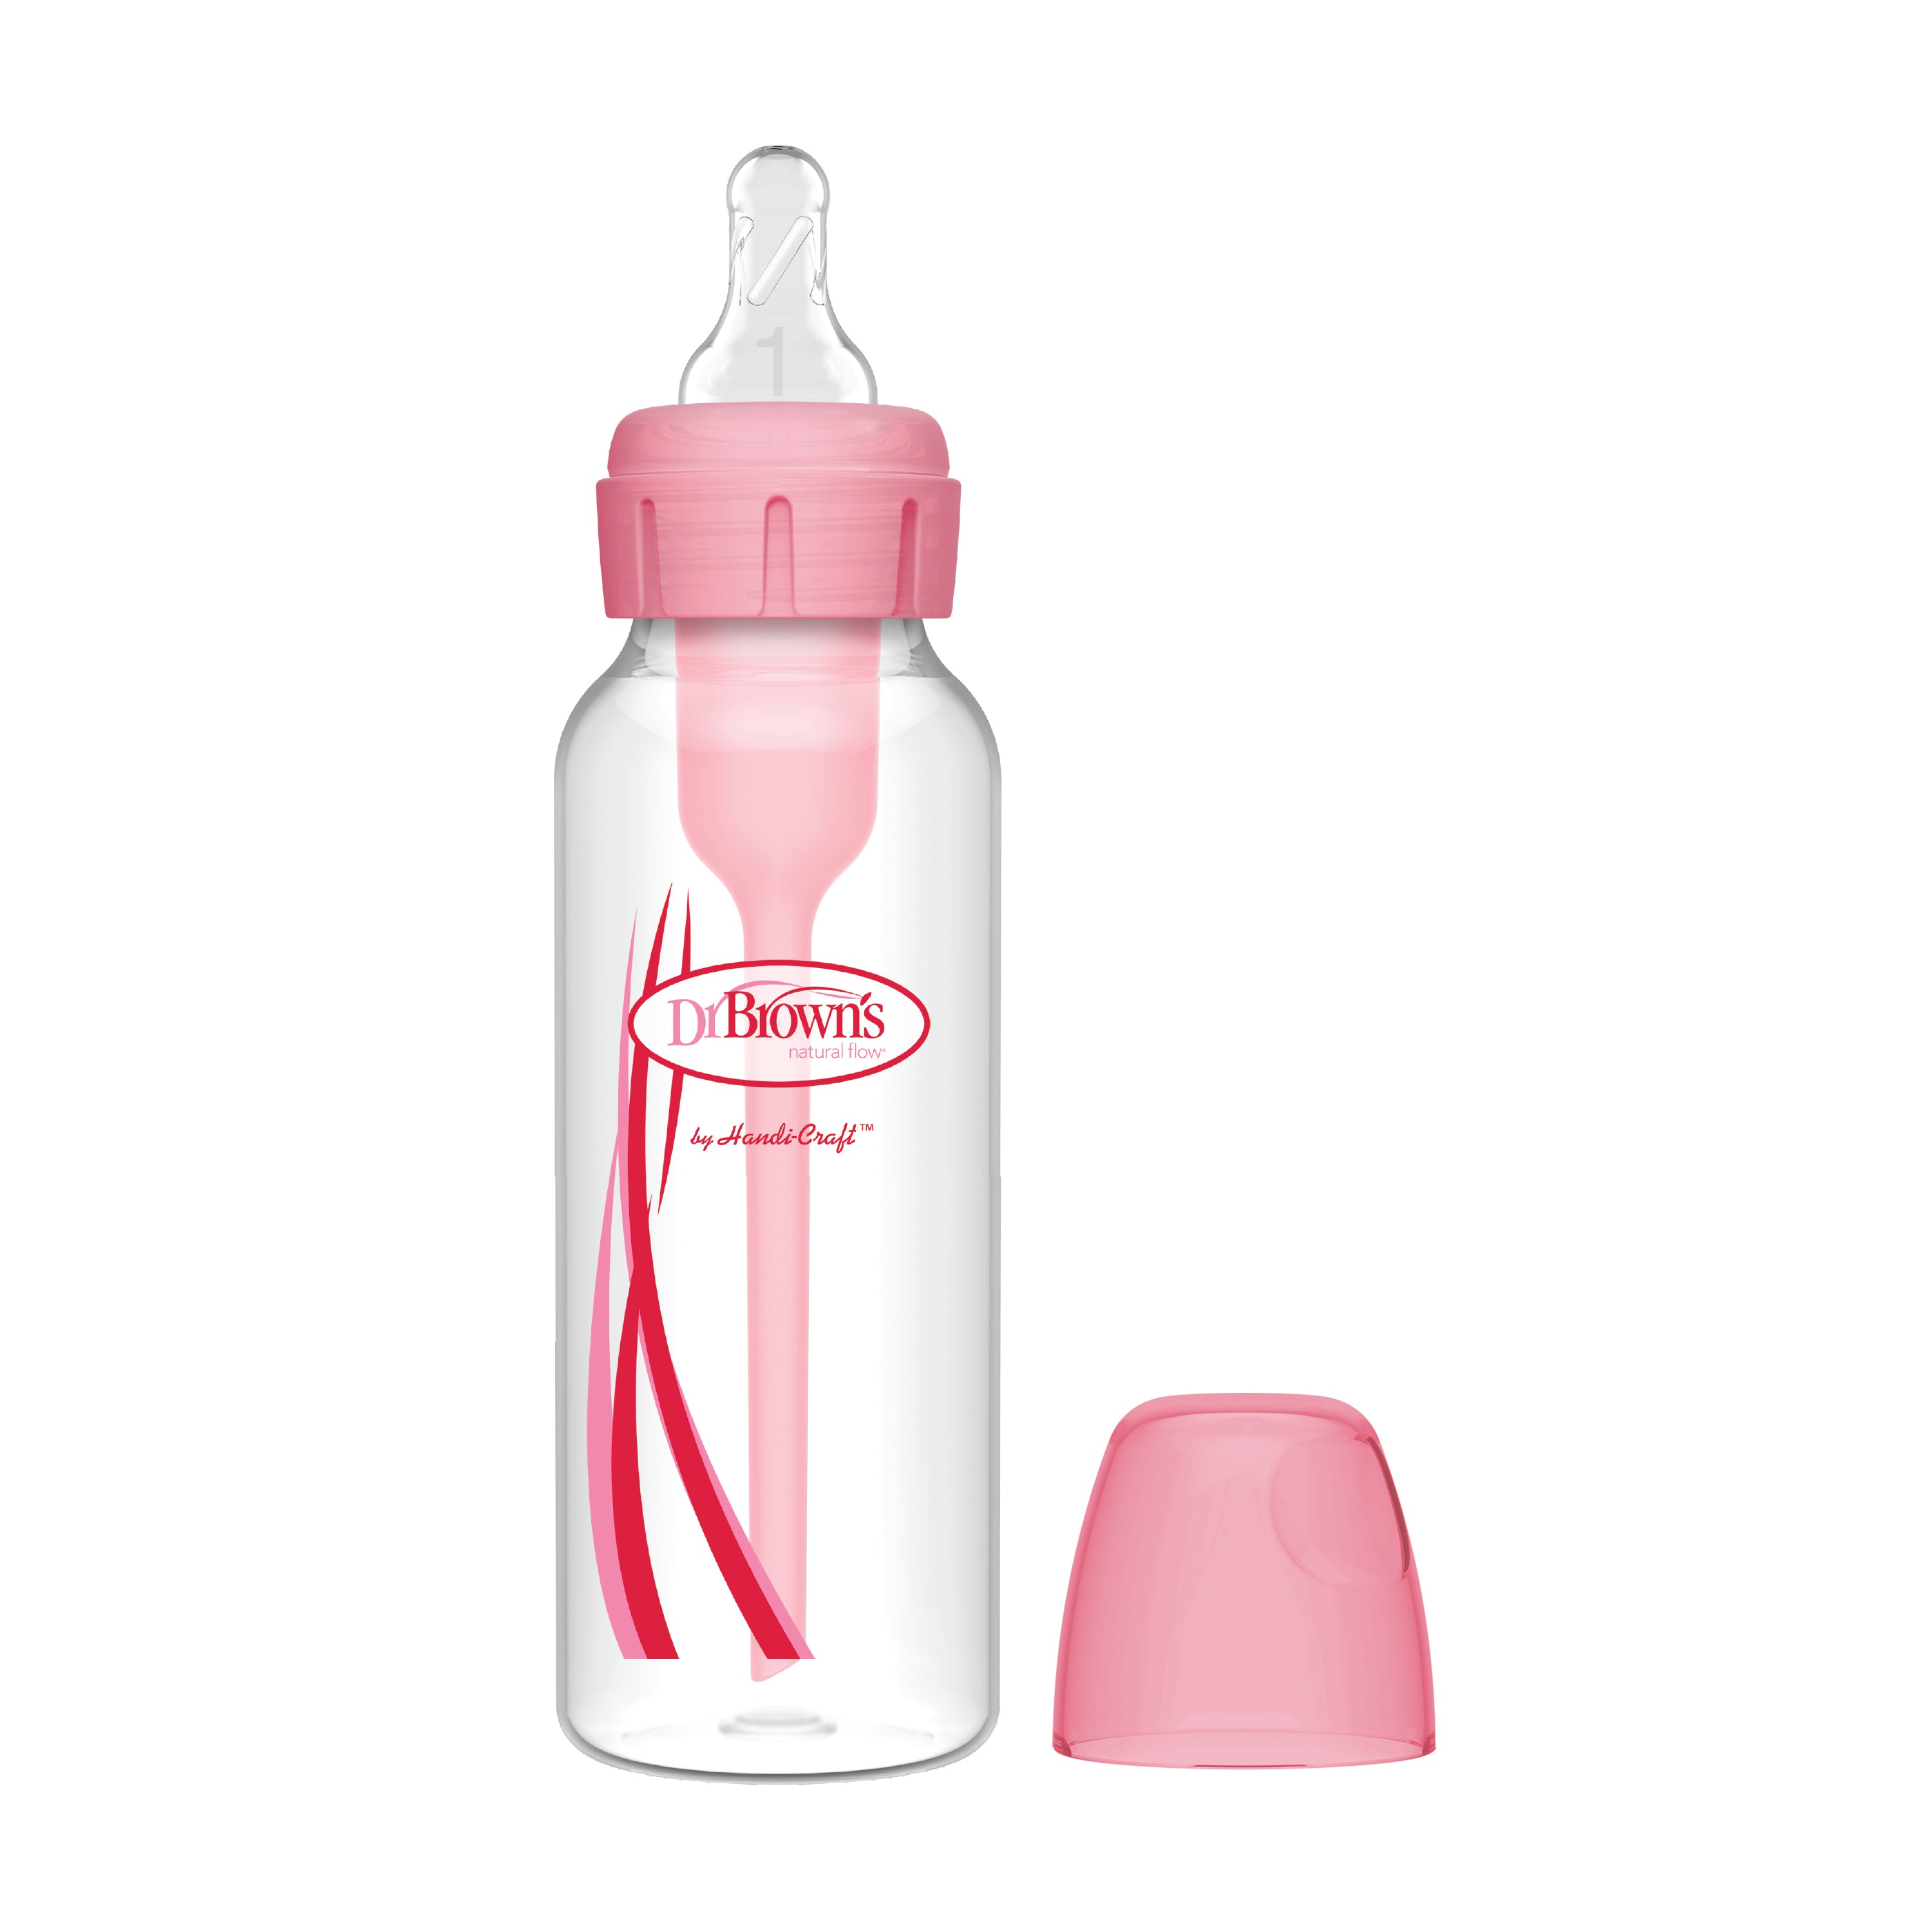 Dr. Brown's 8 oz/250 ml PP Narrow Options+ Bottle - 1-Pack - Pink